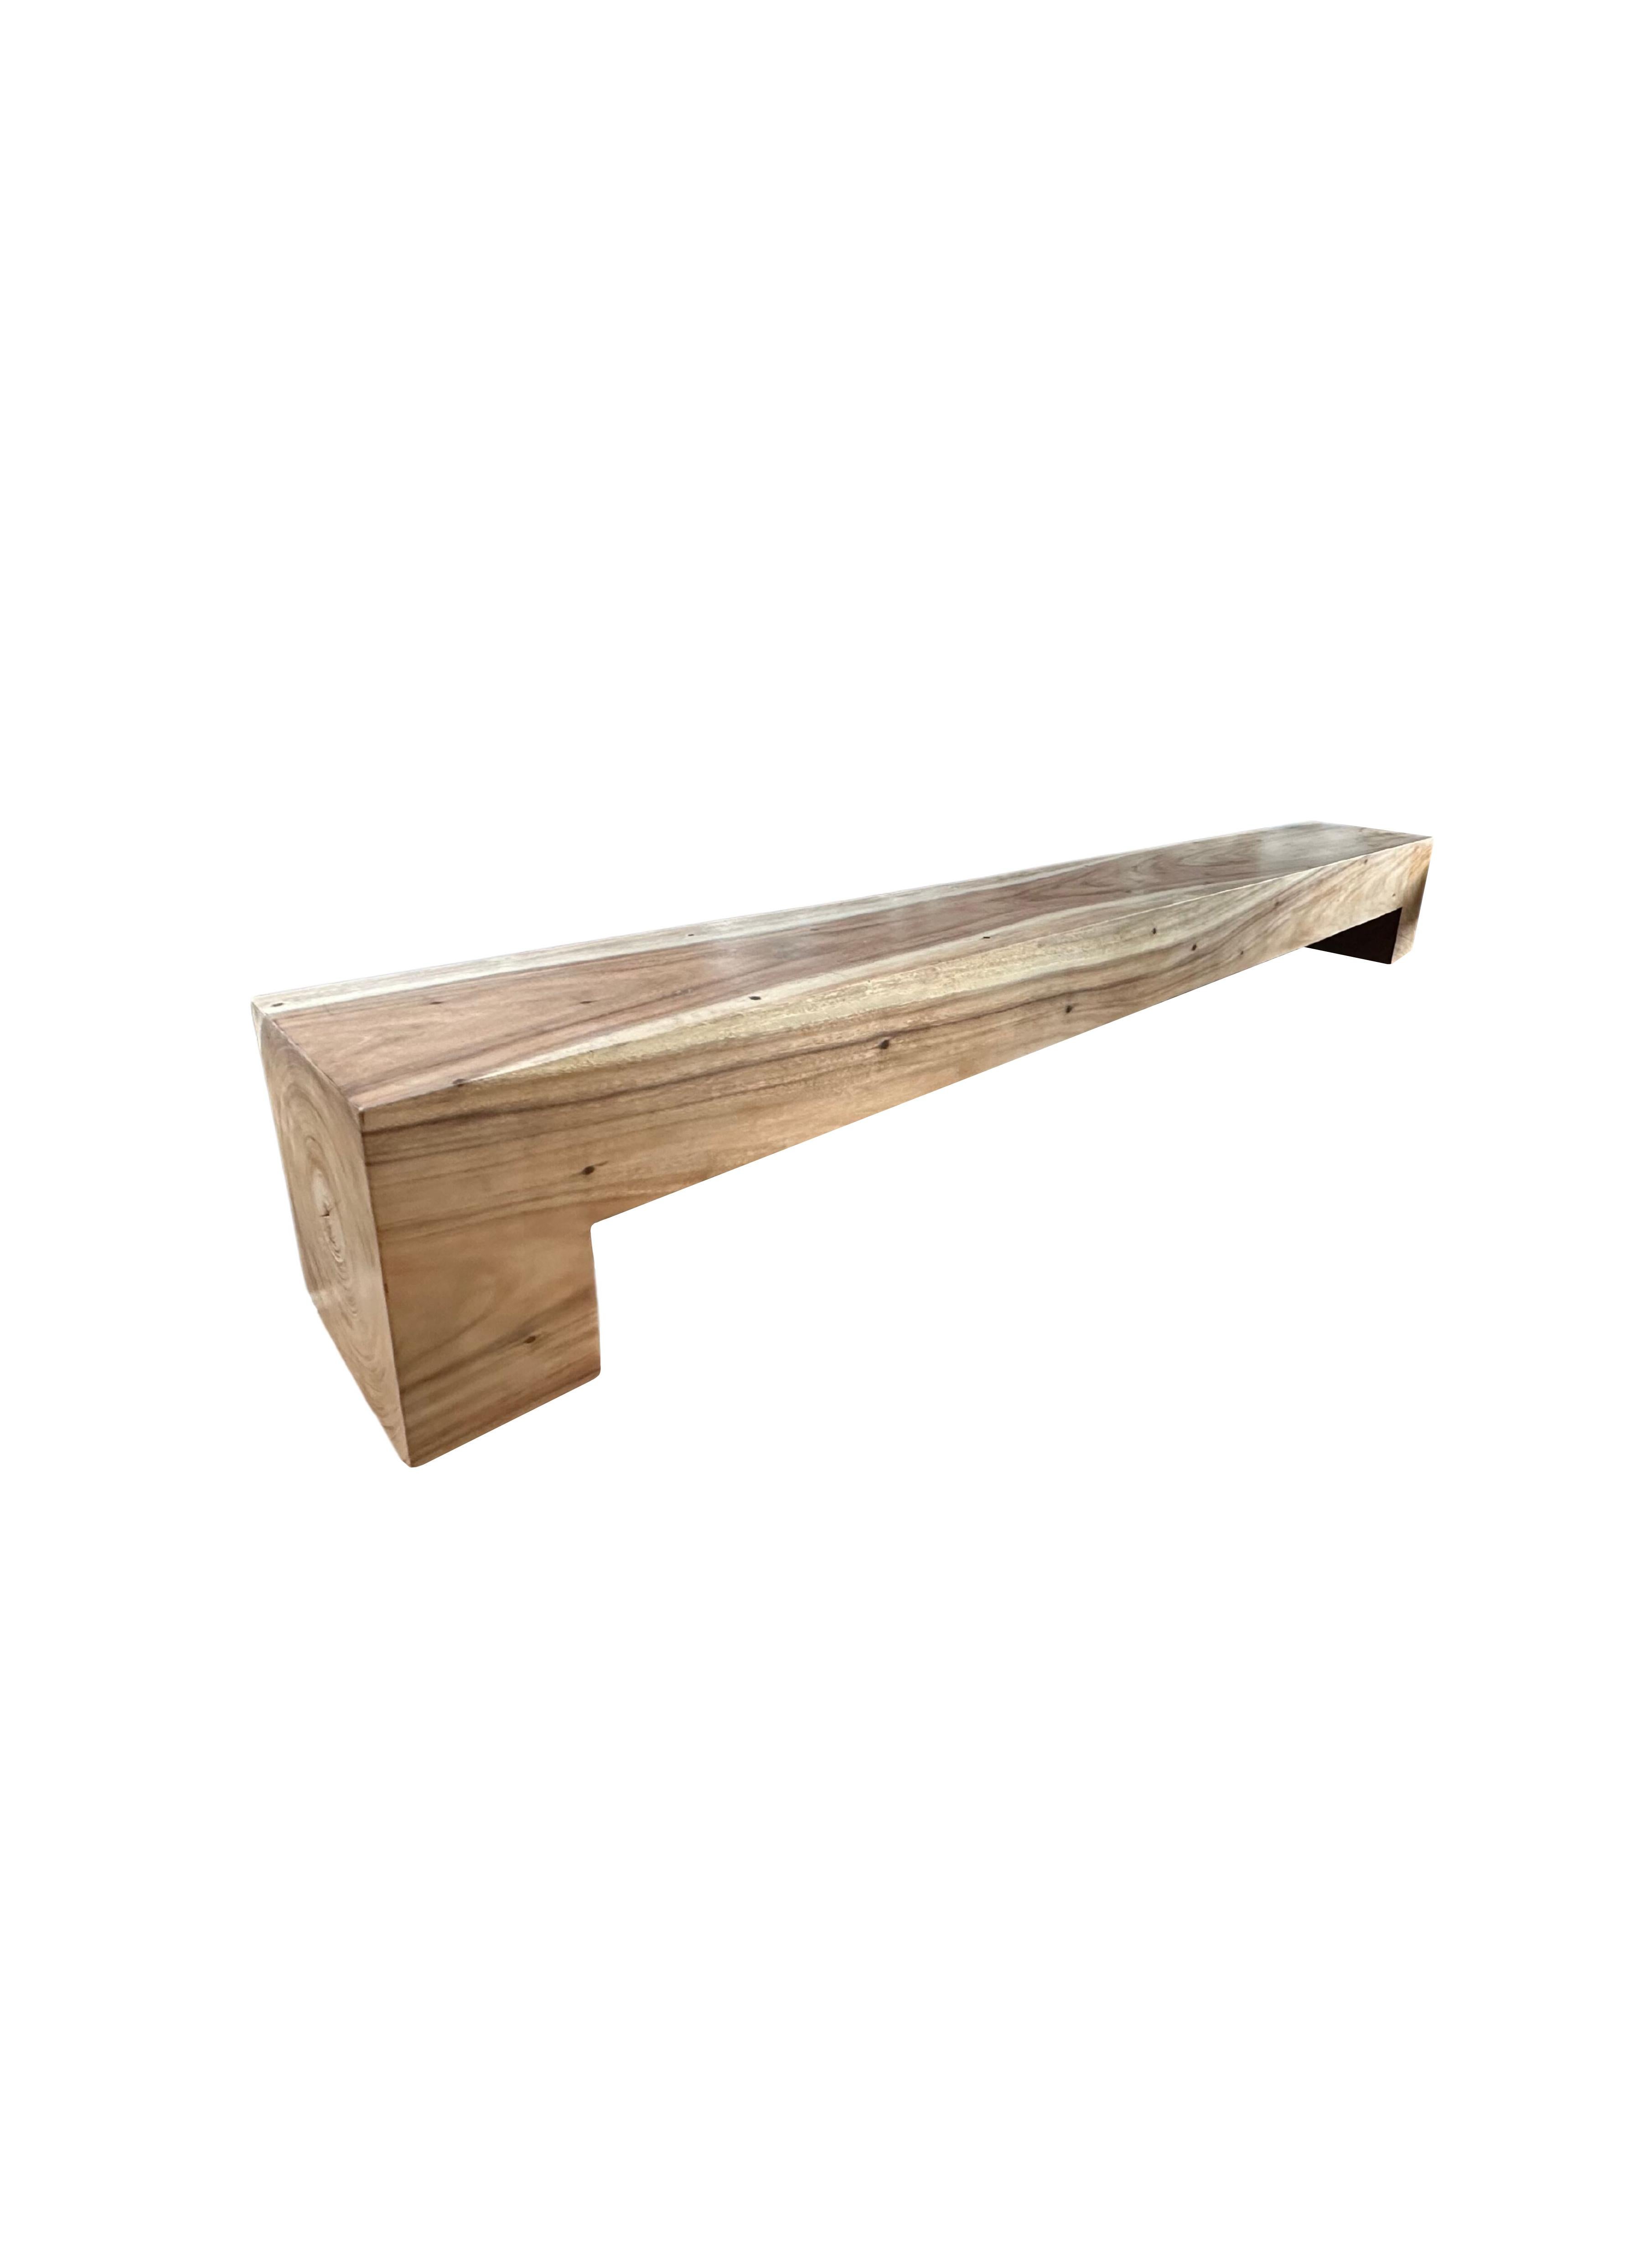 Very Long Sculptural Solid Suar Wood Bench Modern Organic In Good Condition For Sale In Jimbaran, Bali